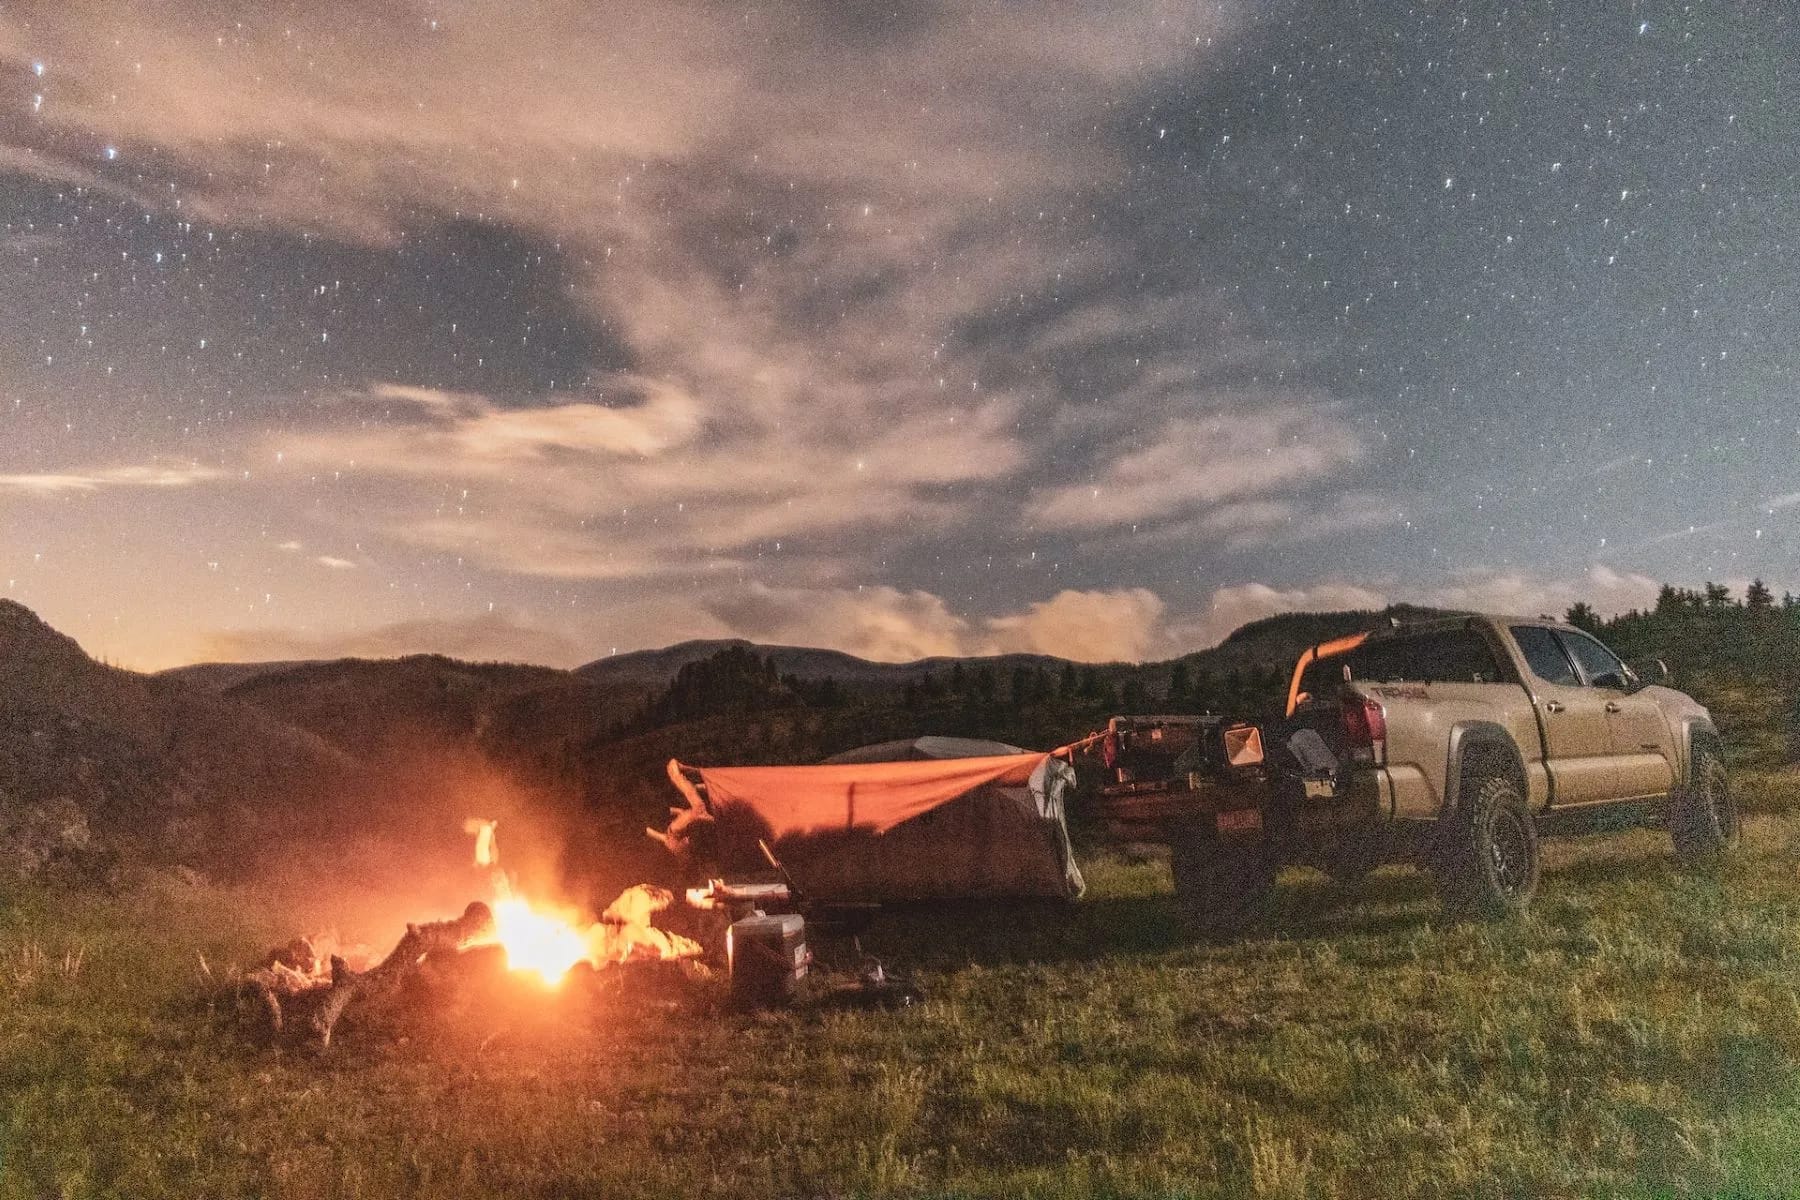 Campers in Colorado with a nearby campfire